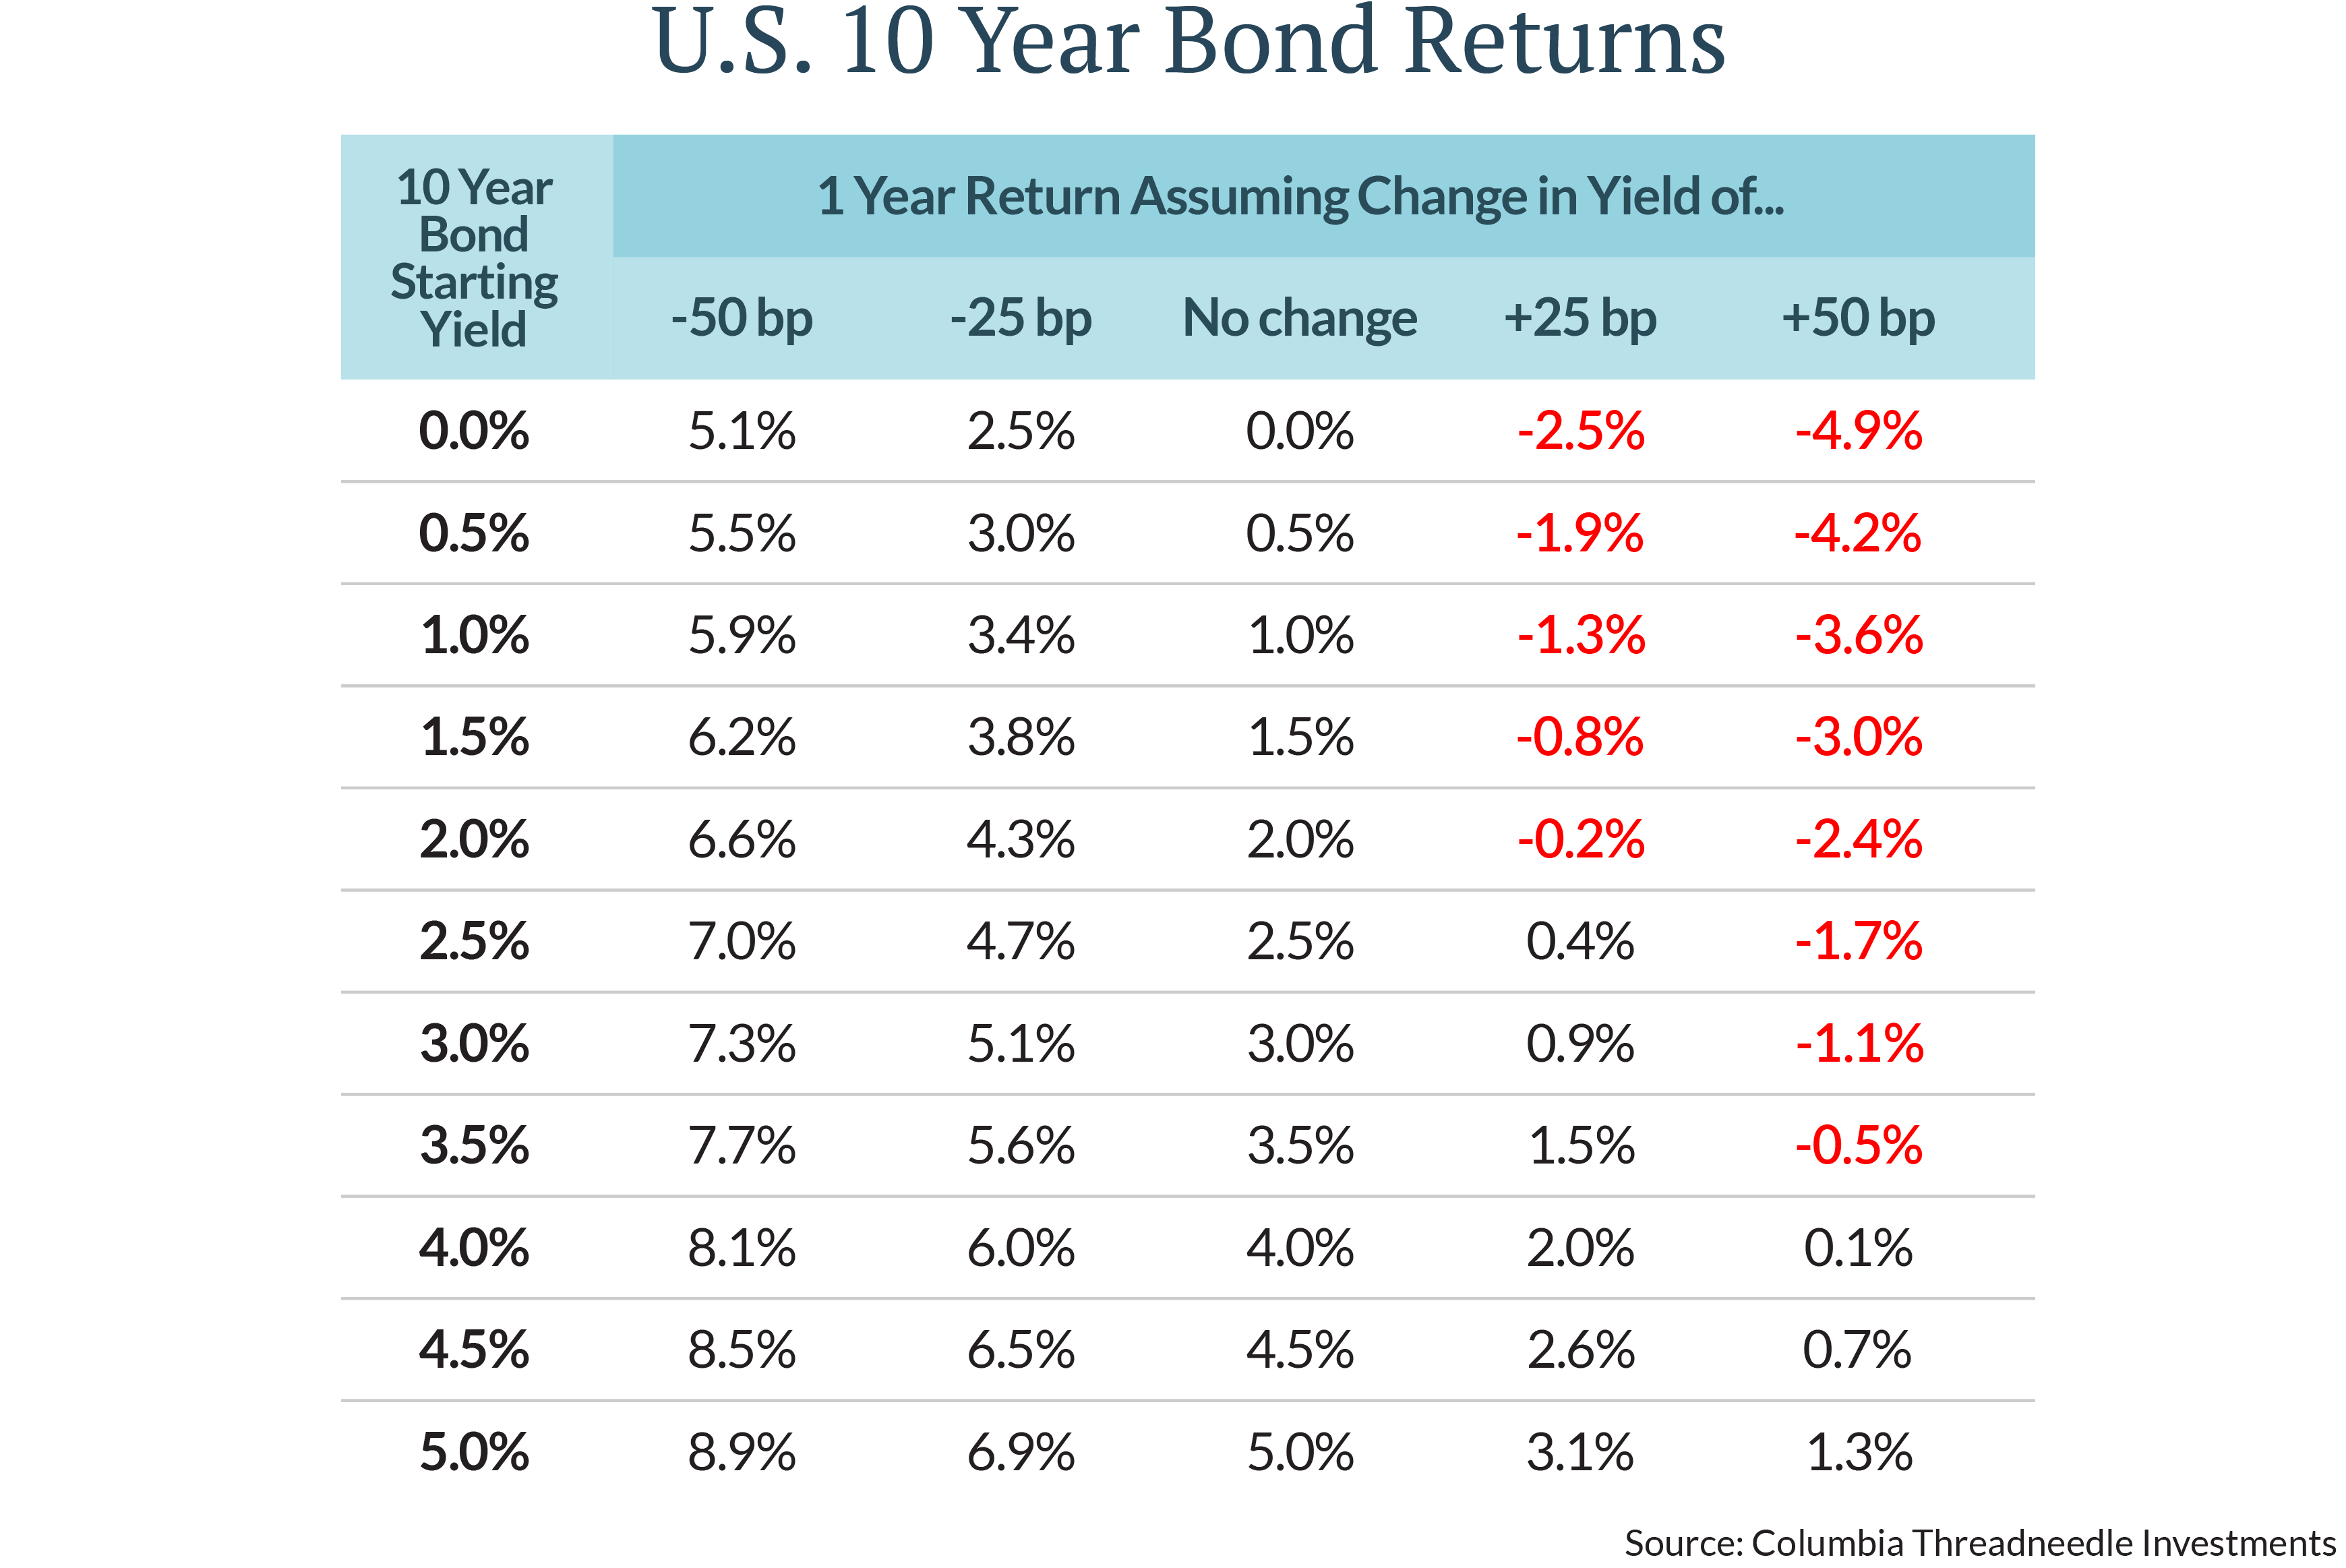 The chart shows hypothetical one-year returns for an investor in a 10-year Treasury bond at different starting yields. Today’s higher yields may provide a cushion of income to offset rising interest  rates. Should rates decline, an investor who buys the 10-year at 3% today could see significant price appreciation